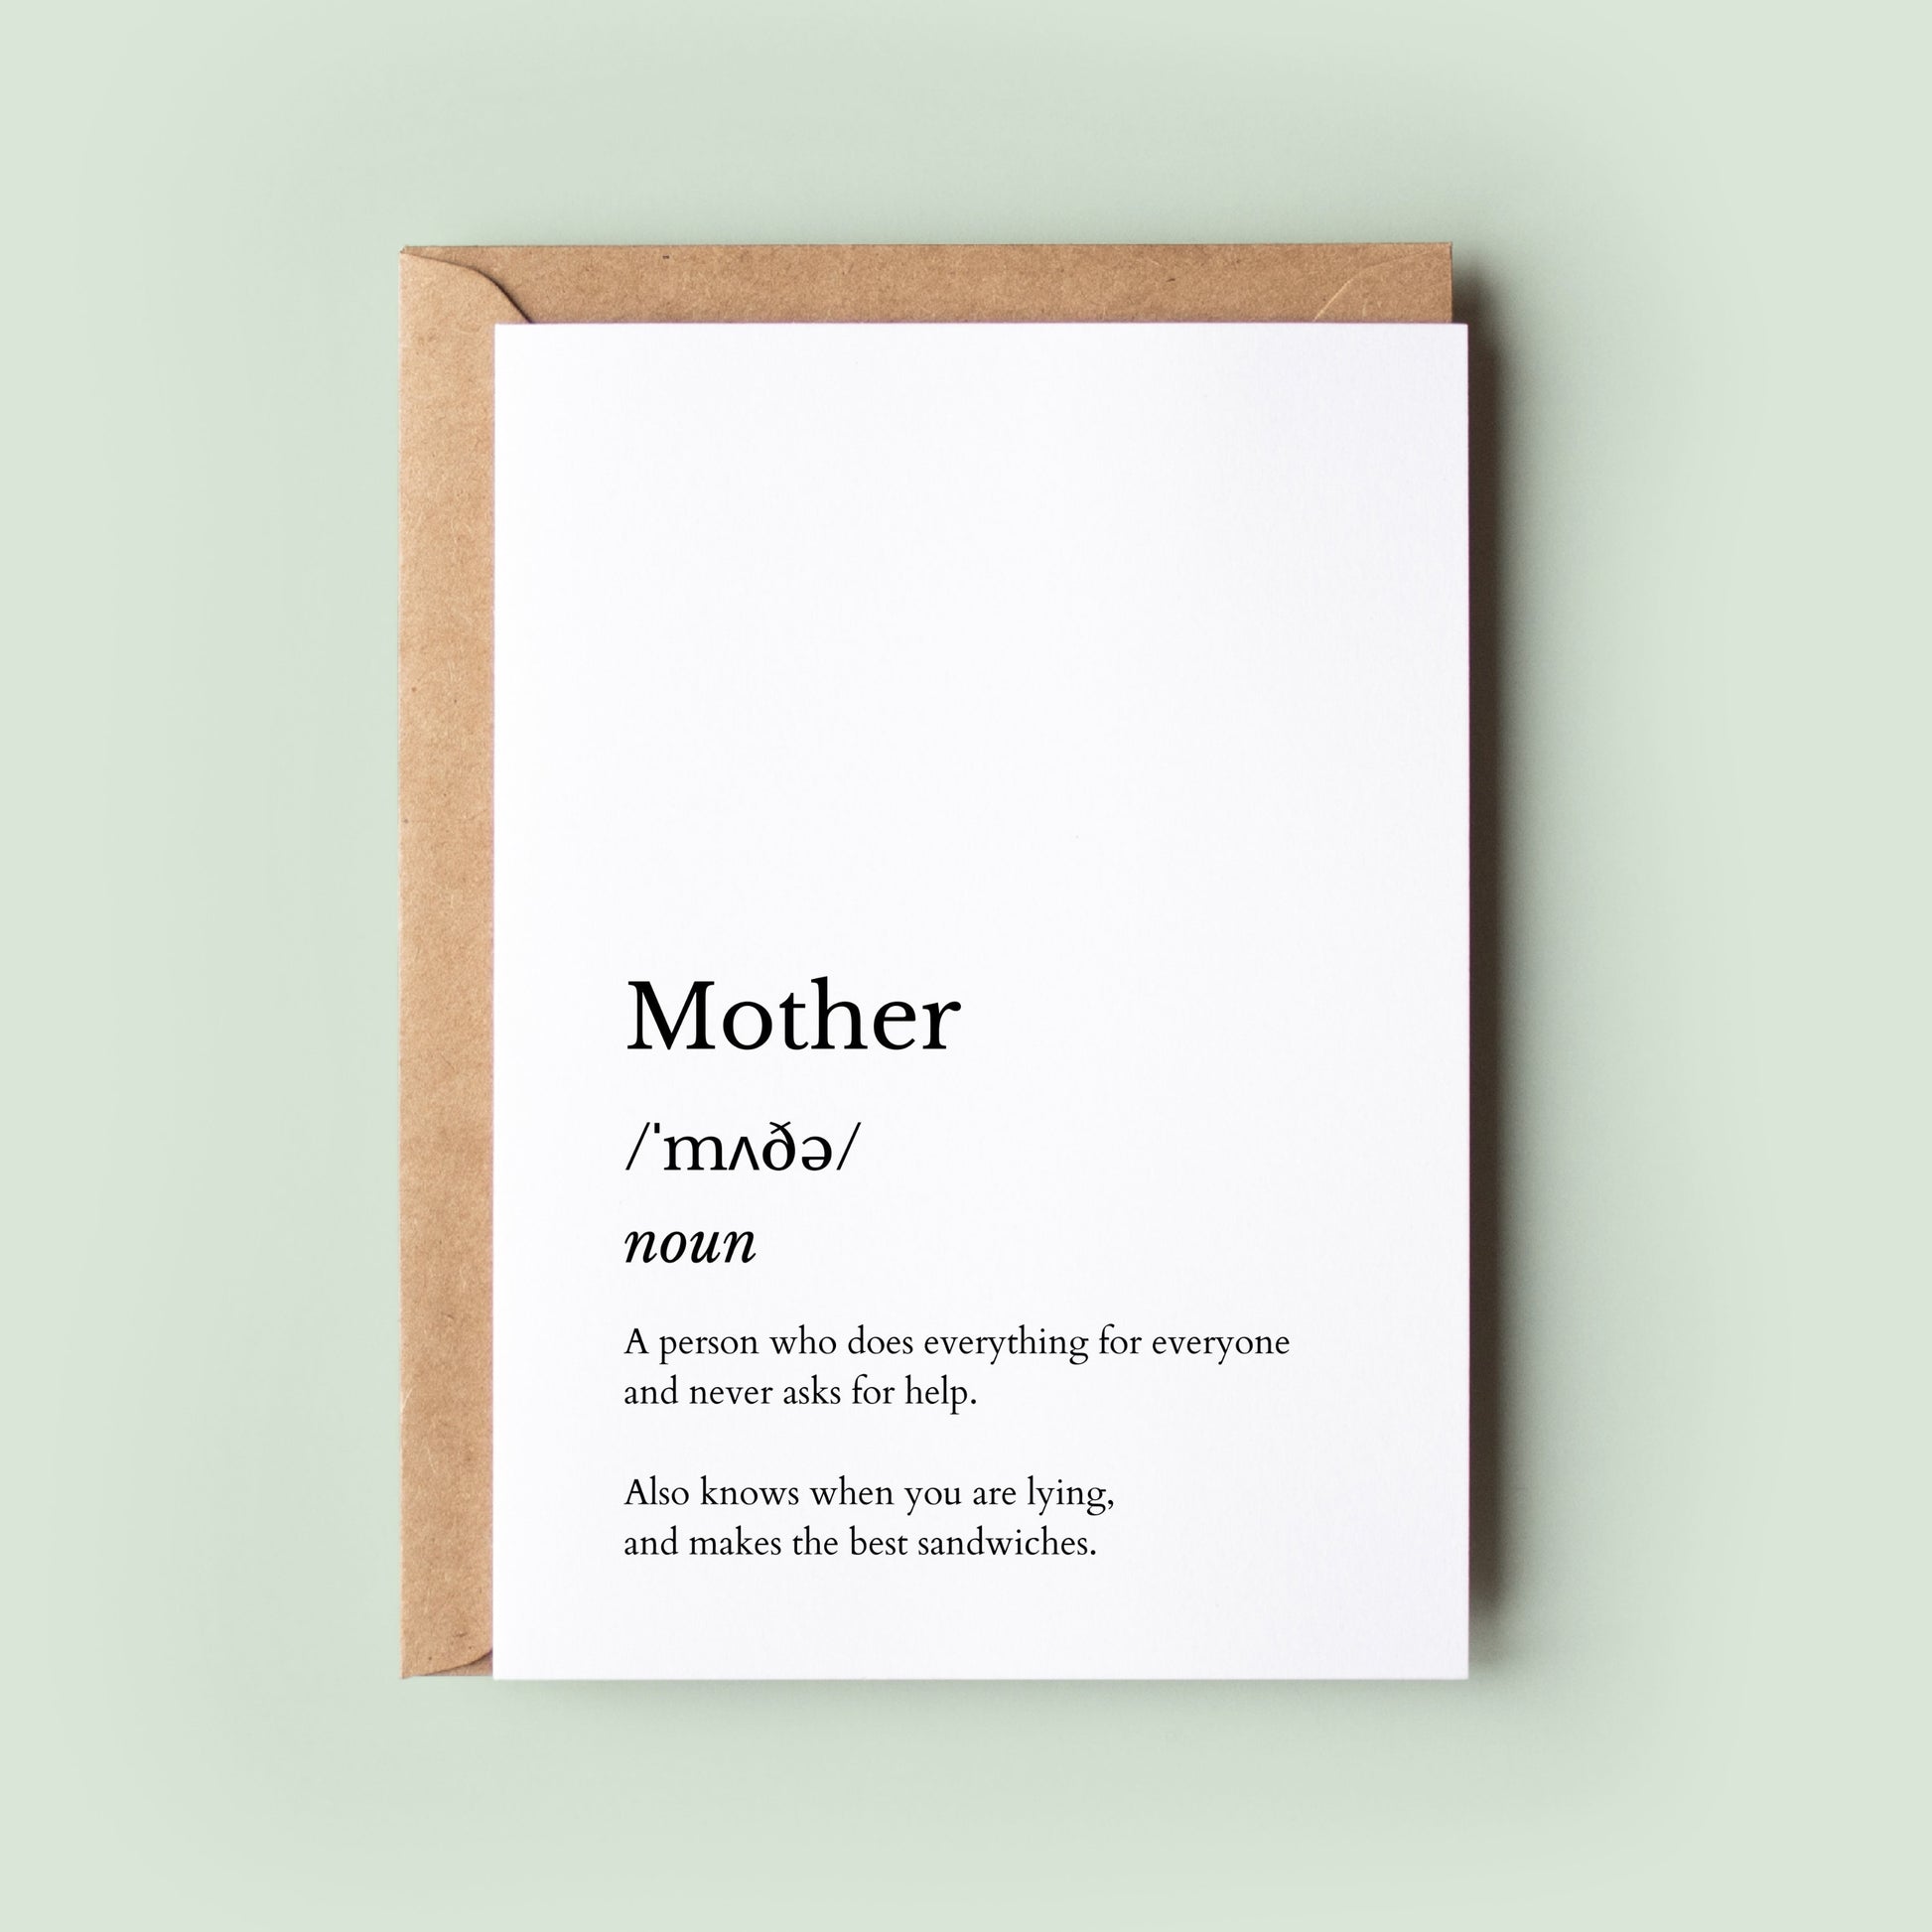 Mum Mother Definition Card, Mother's Day Card, Happy Mother's Day, Card For Mum, Card For Mom, Mother's Day Card For Mum, Greeting Card